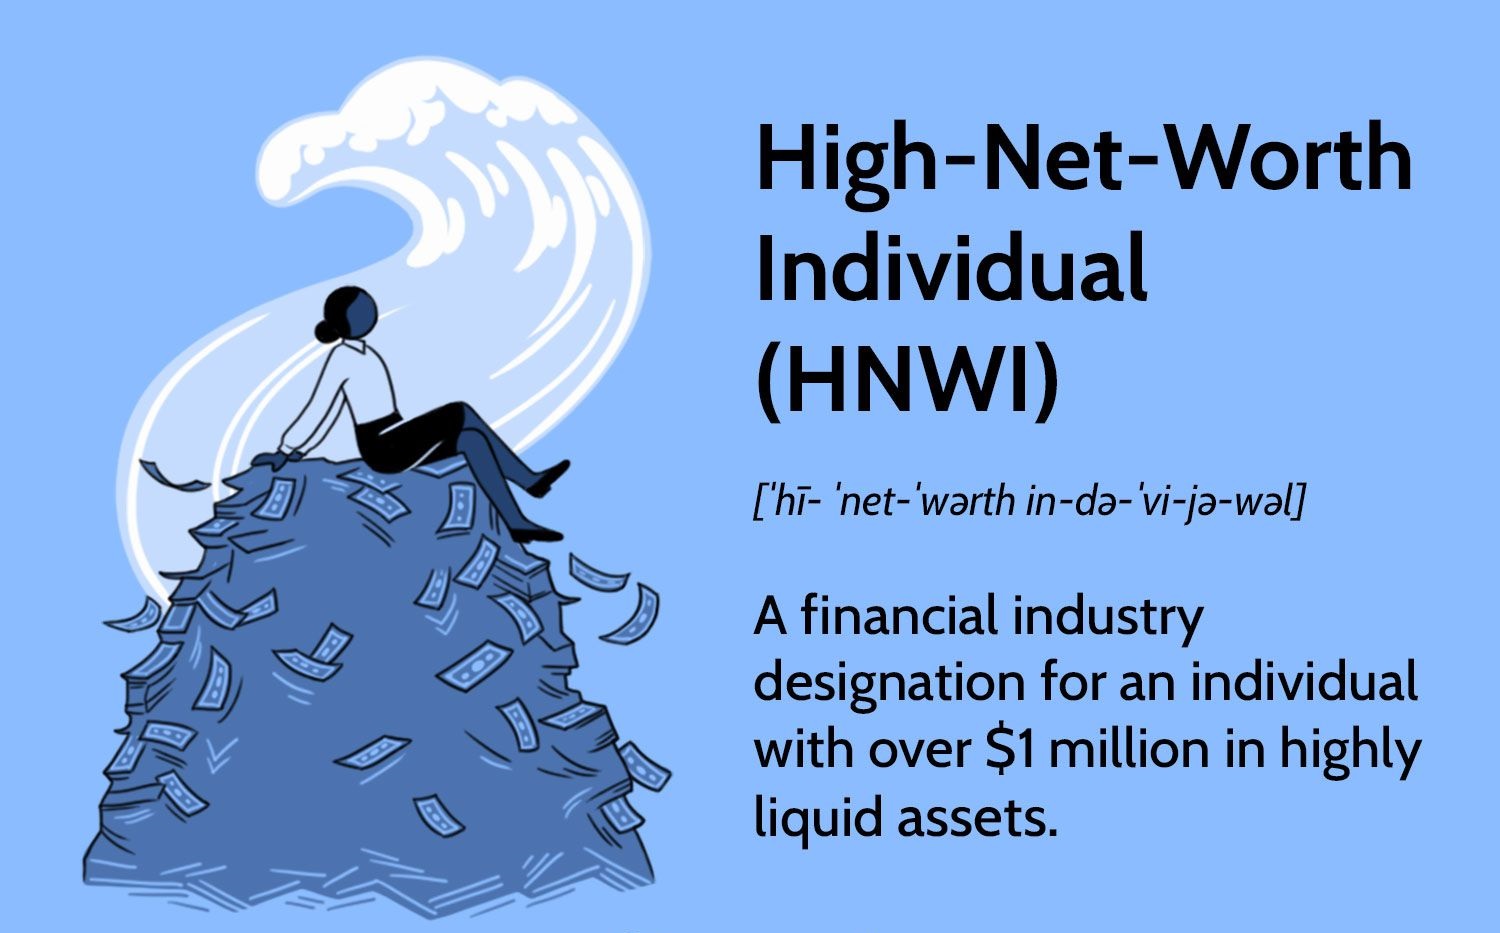 Wealthy Individuals Who Seek High Returns Through Private Investments